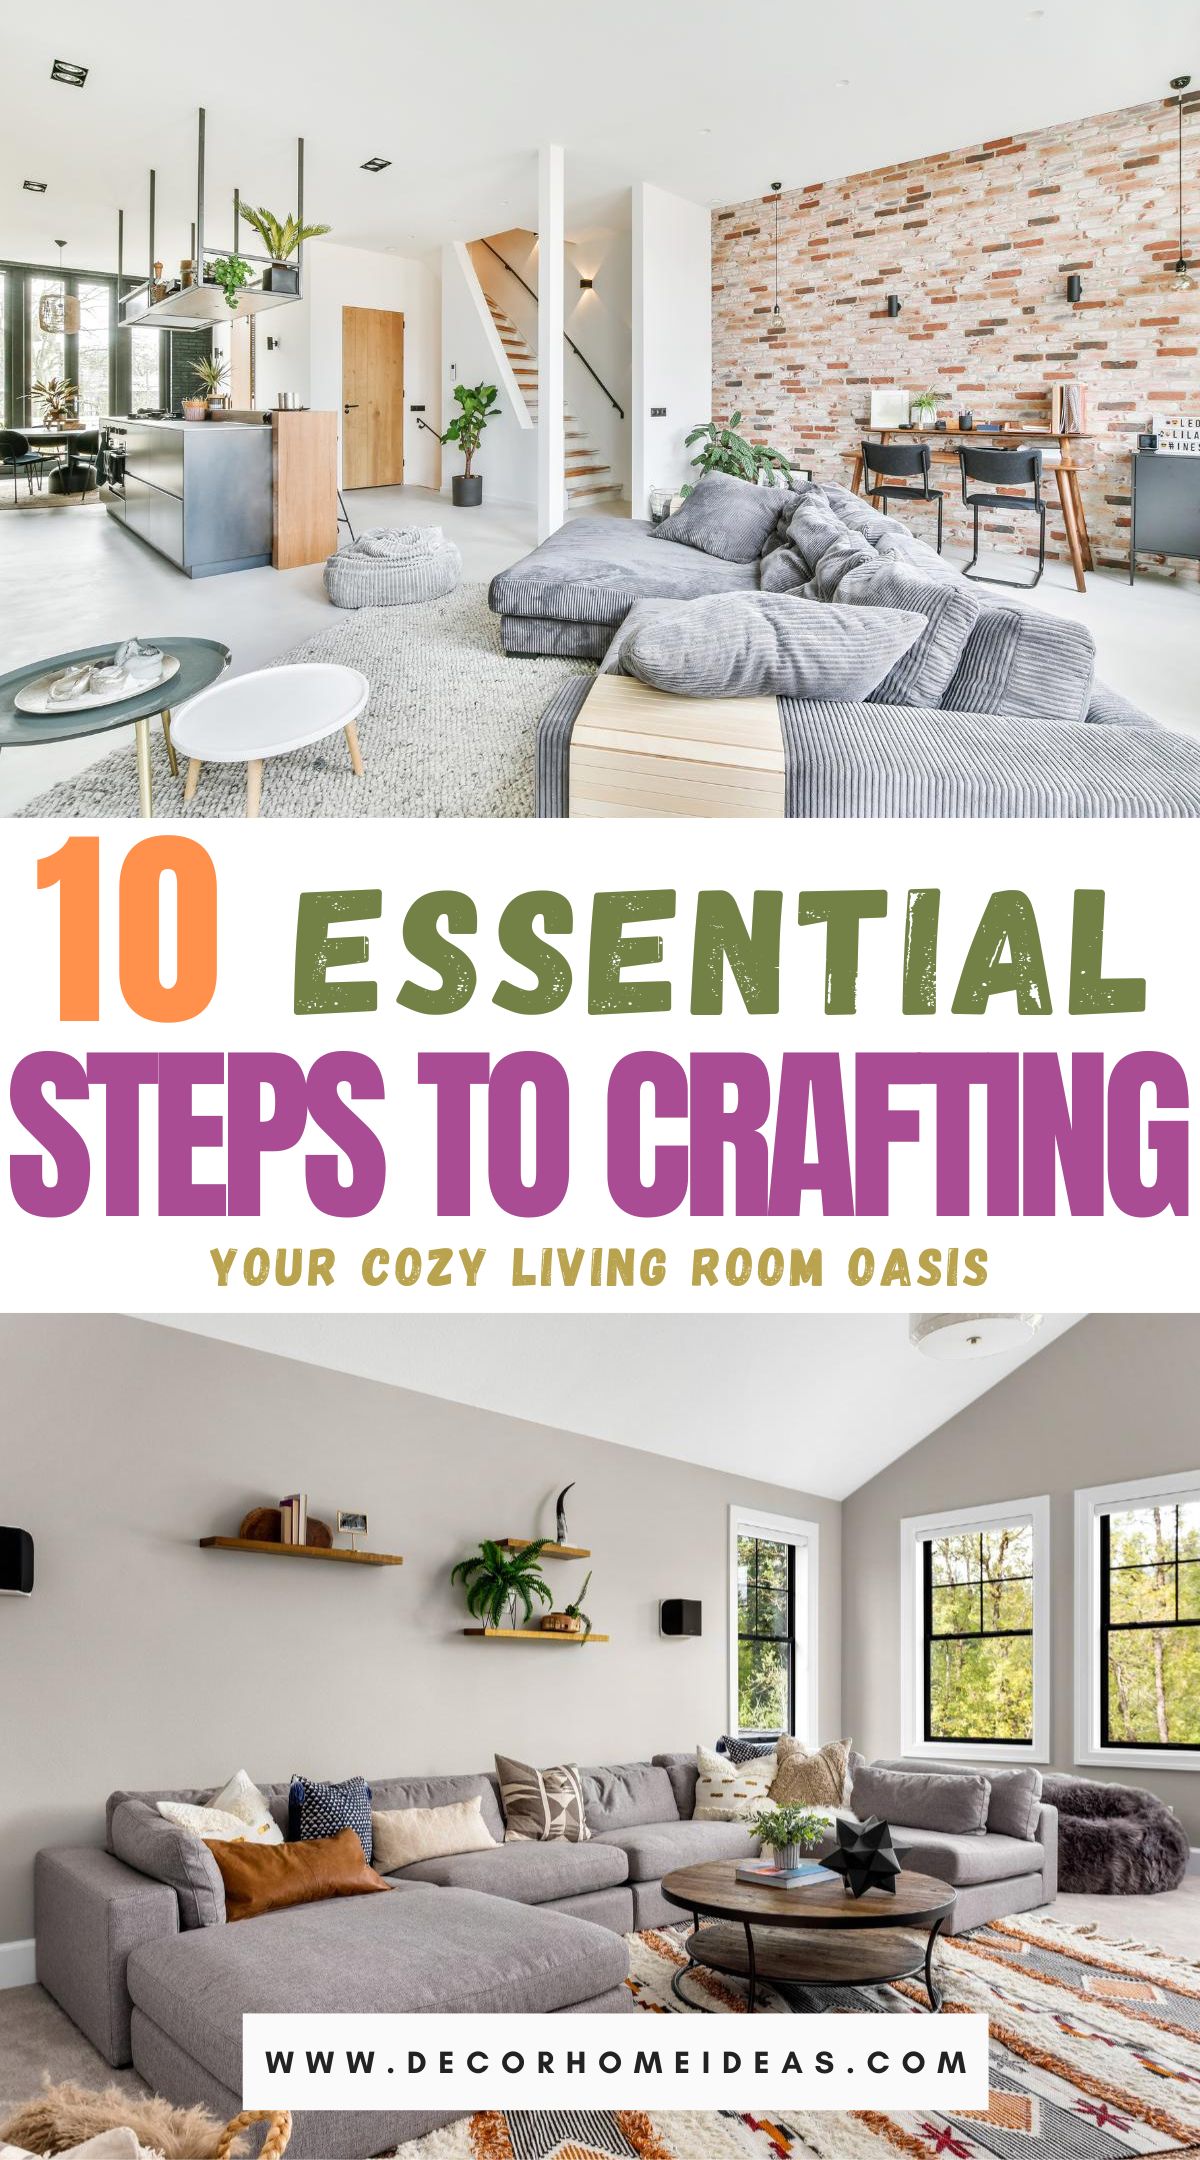 Craft your cozy living room oasis with these 10 essential steps. From selecting the perfect furniture to adding soft textiles and warm lighting, explore expert tips to create a welcoming and comfortable space for relaxation and enjoyment.